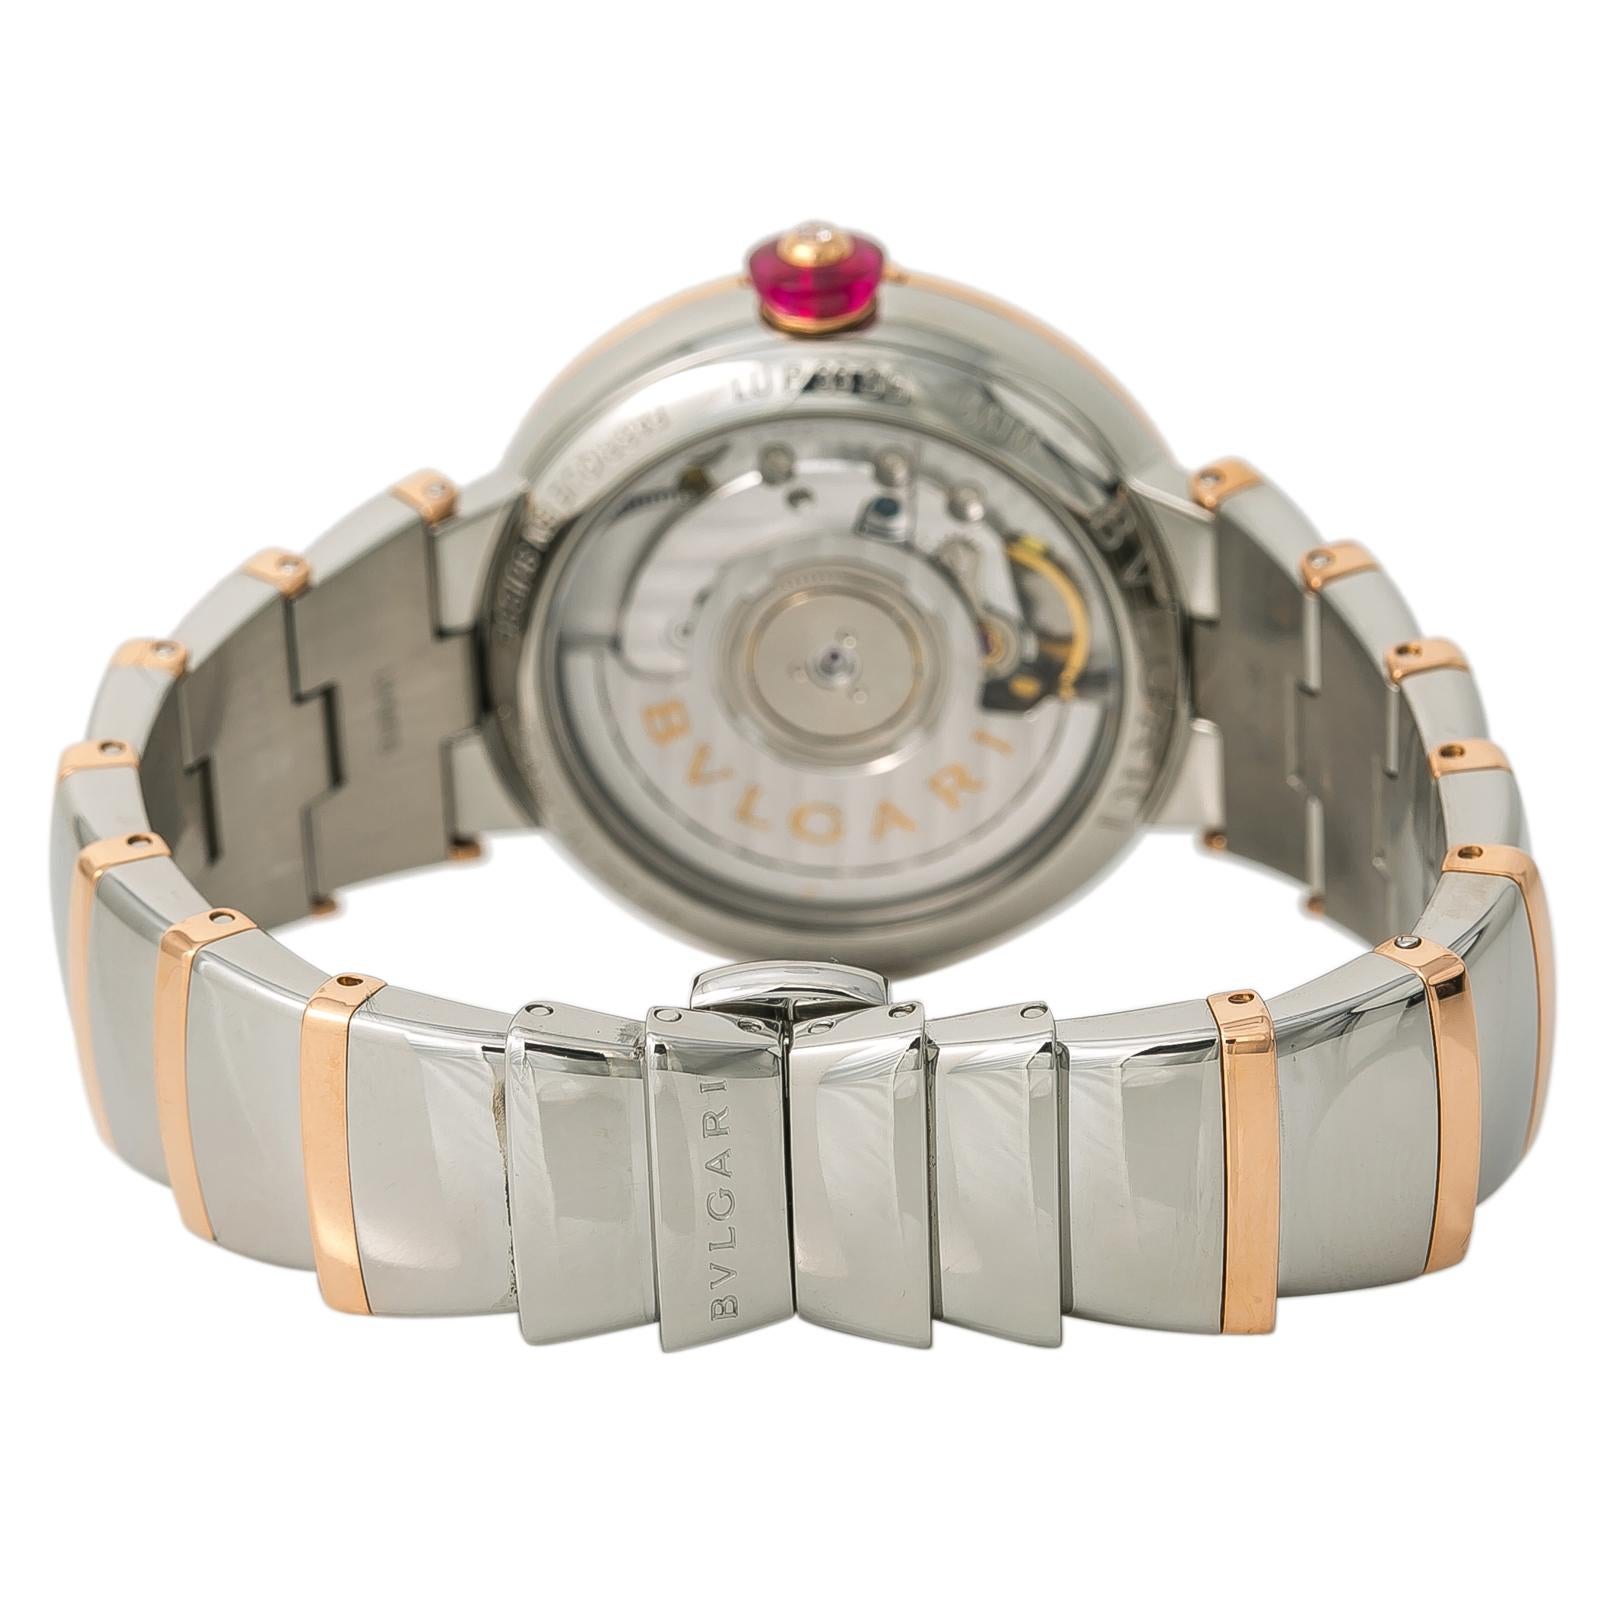 Women's Bvlgari Lvcea LUP 33 SG Ladies Automatic Watch 18k Rose Gold Two Tone For Sale